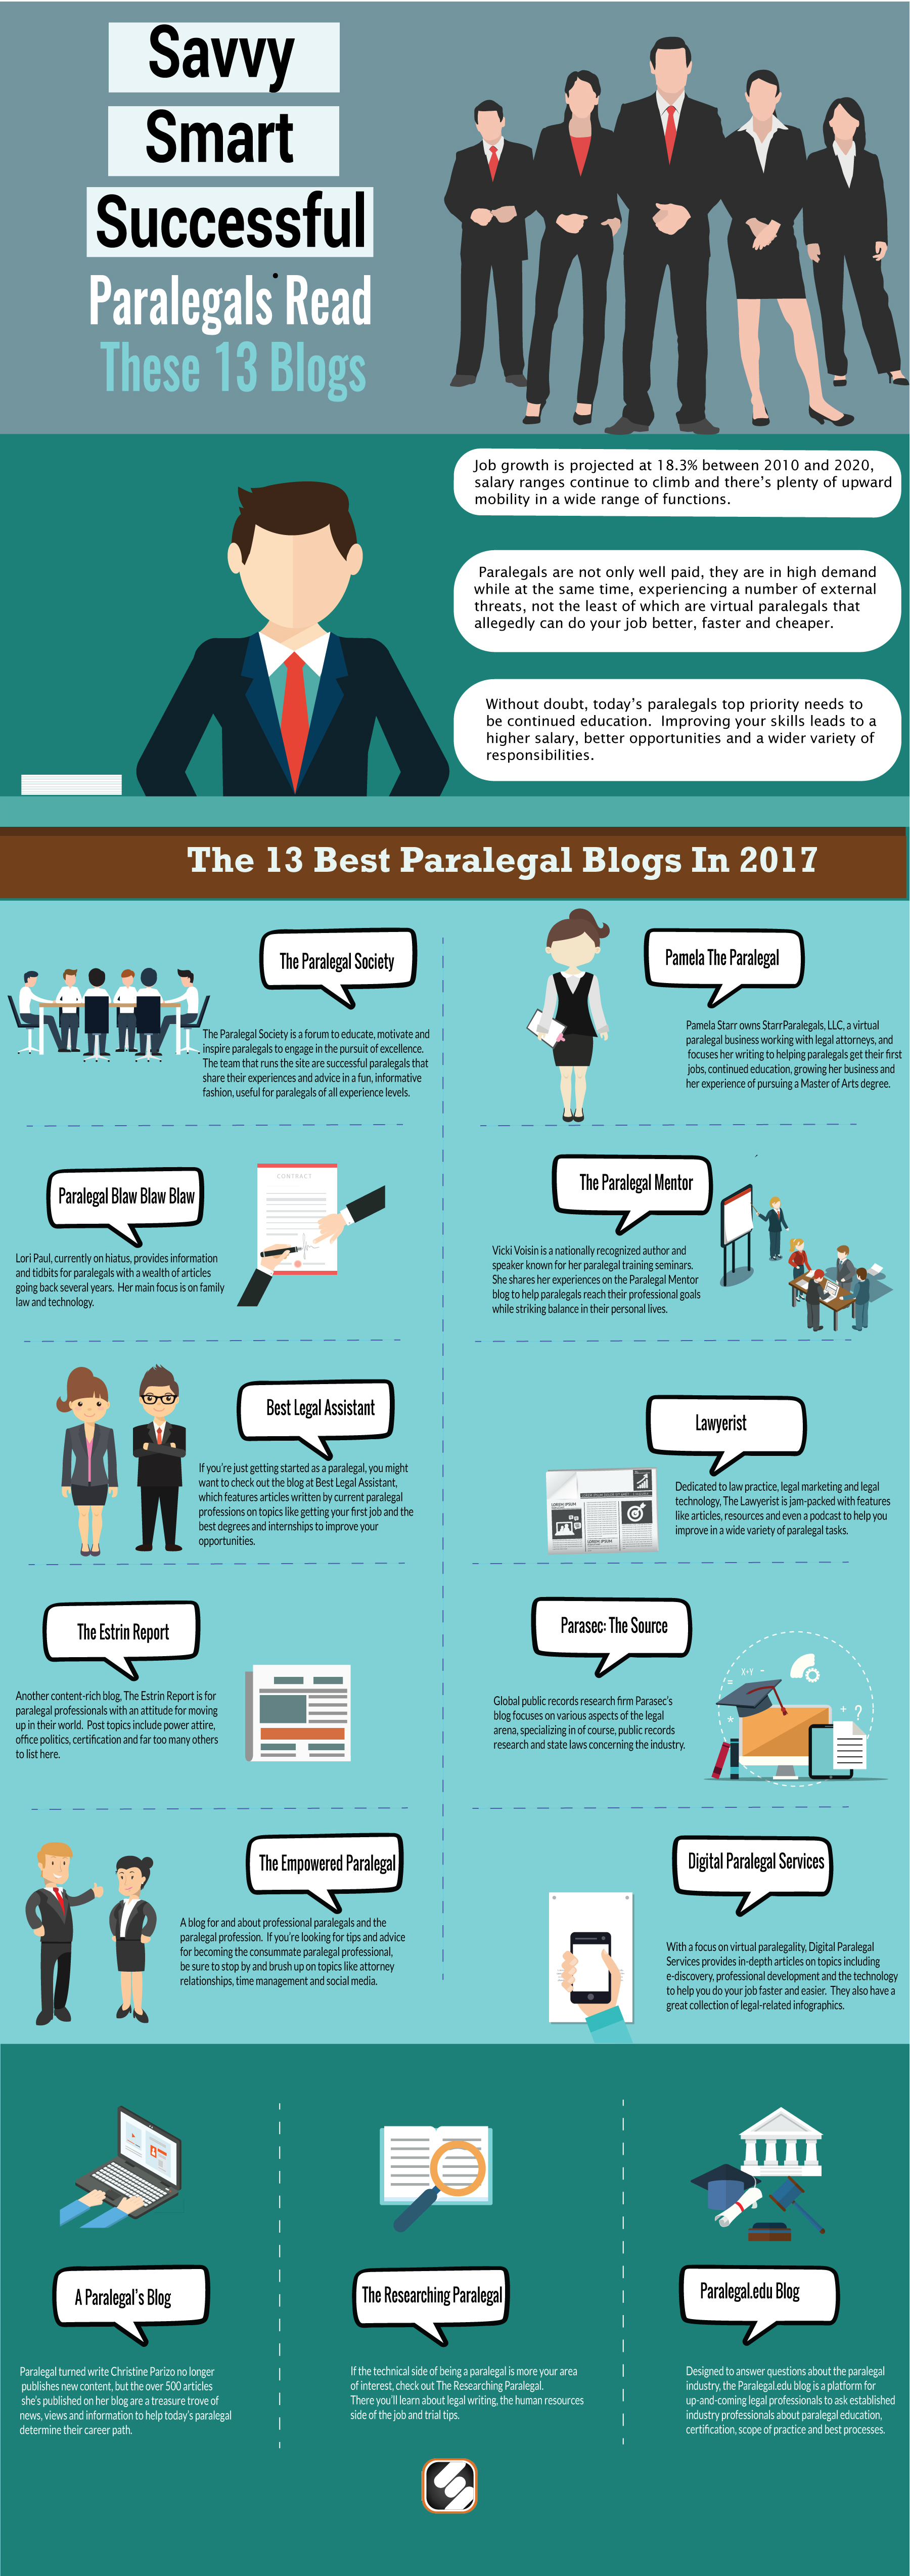 Successful Paralegals Are Reading These 13 Industry Blogs